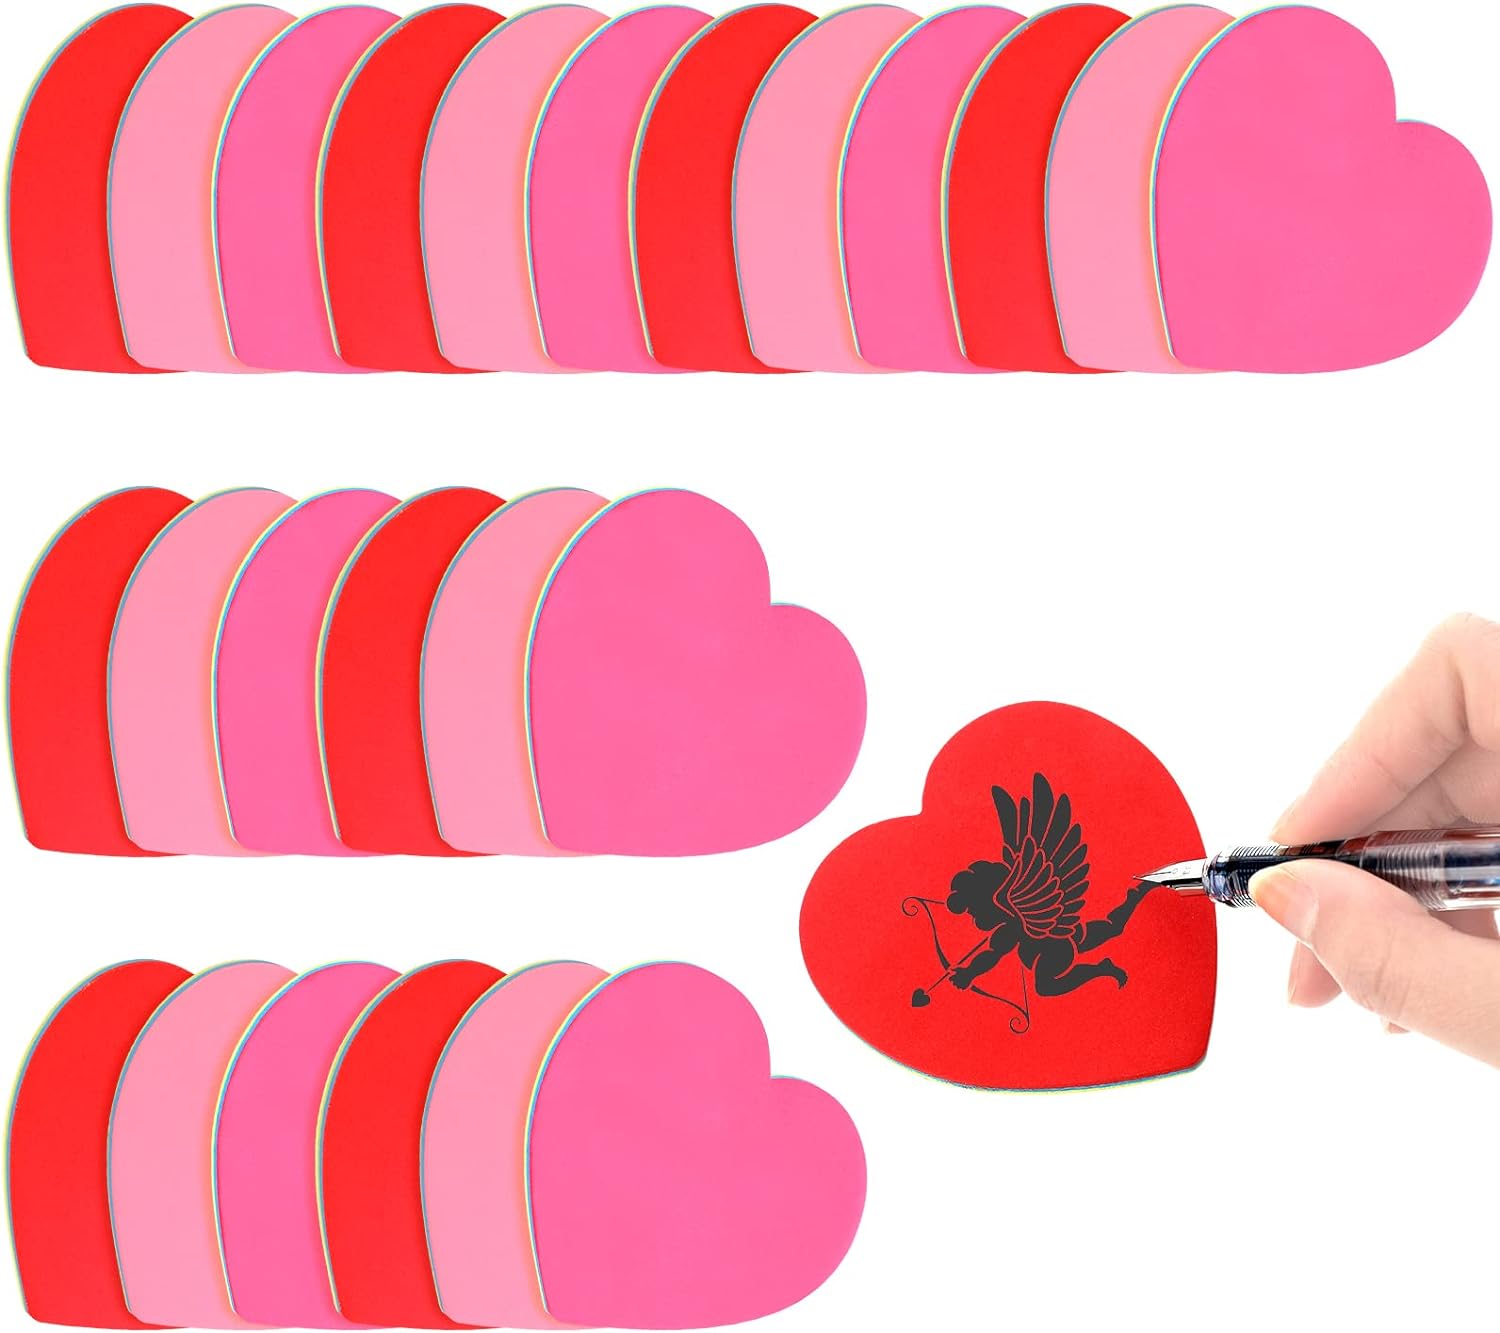 BBTO 720 Sheets Heart Shaped Sticky Notes Valentine' Day Sticky Memo Funny Self Stick 3 x 3 Inch Colorful Cute Note Pads Removable Easy to Post for Office School Home Business Girls(Elegant Colors)